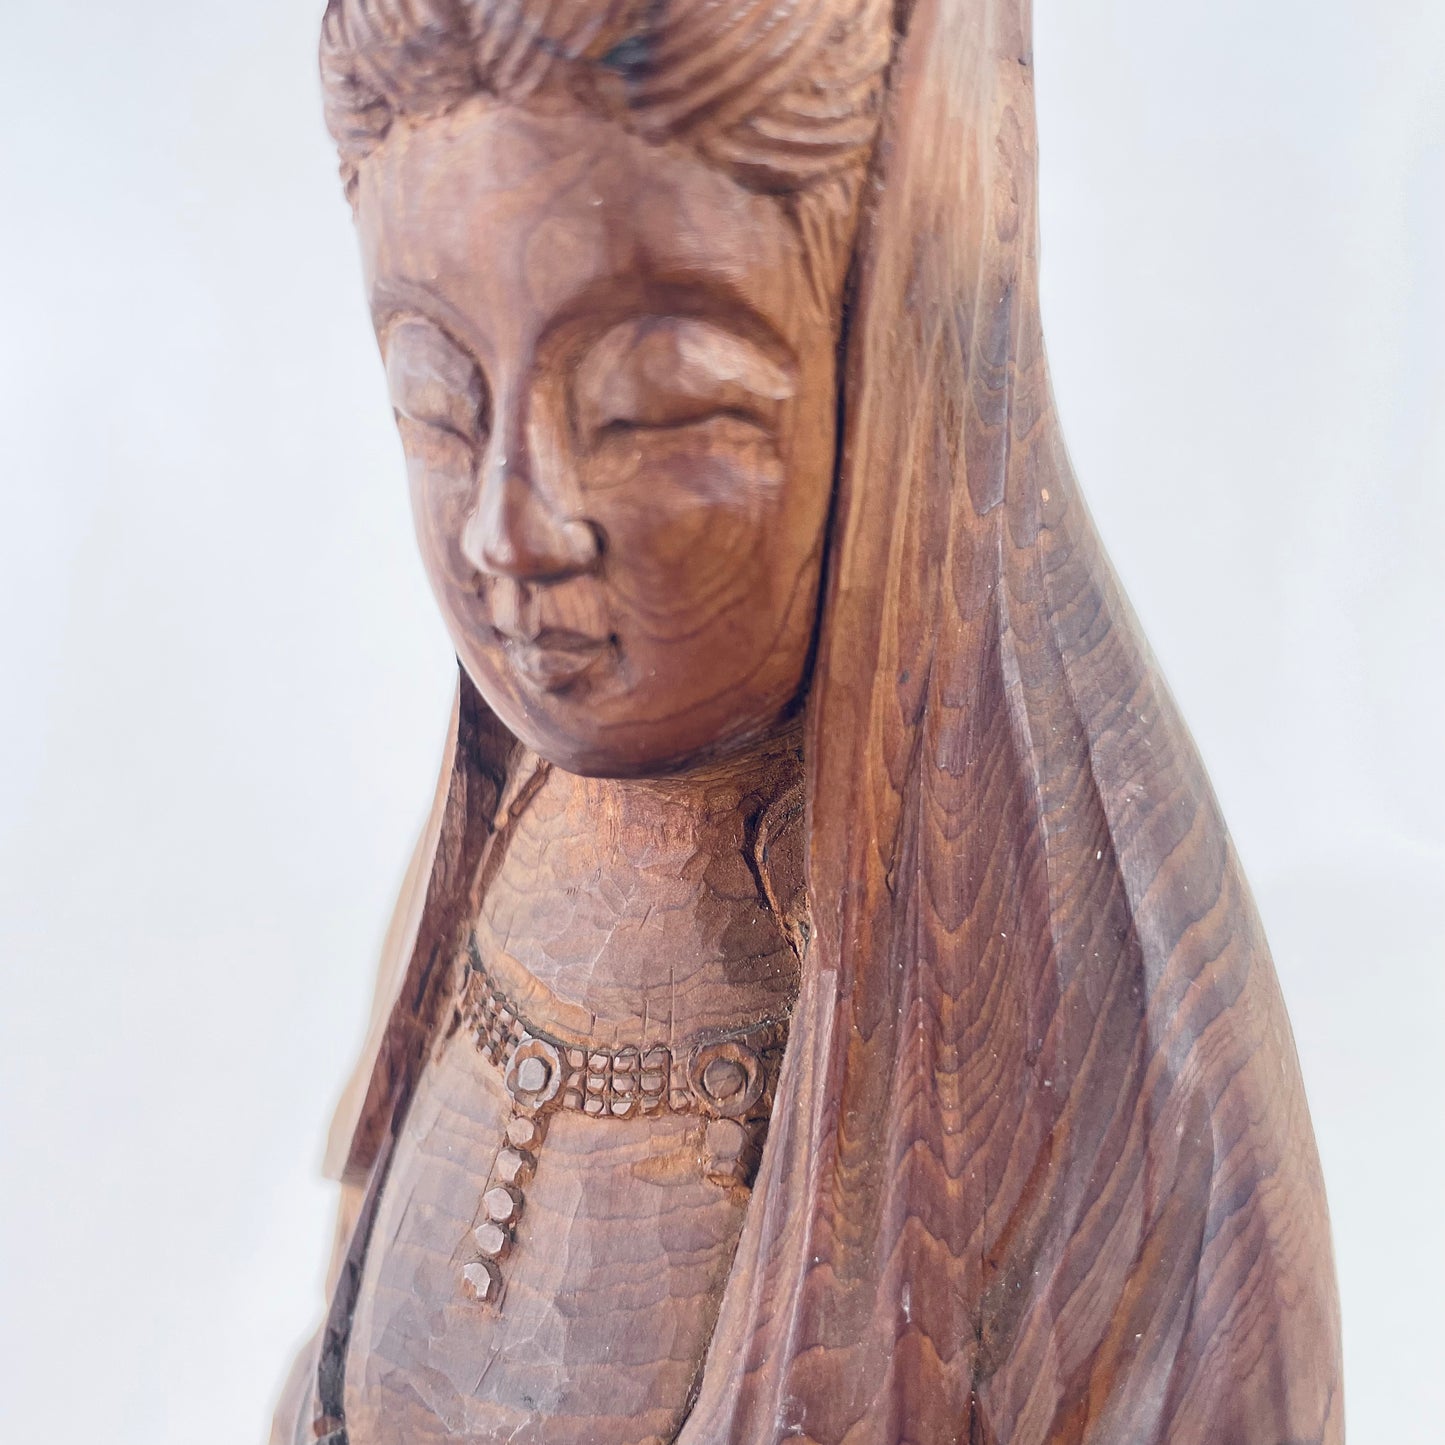 Antique Statue of Quan-Yin Japanese Wood Carved Avalokitishvara Kanon Bodisattva of Compassion Standing Pose 11.5” Tall